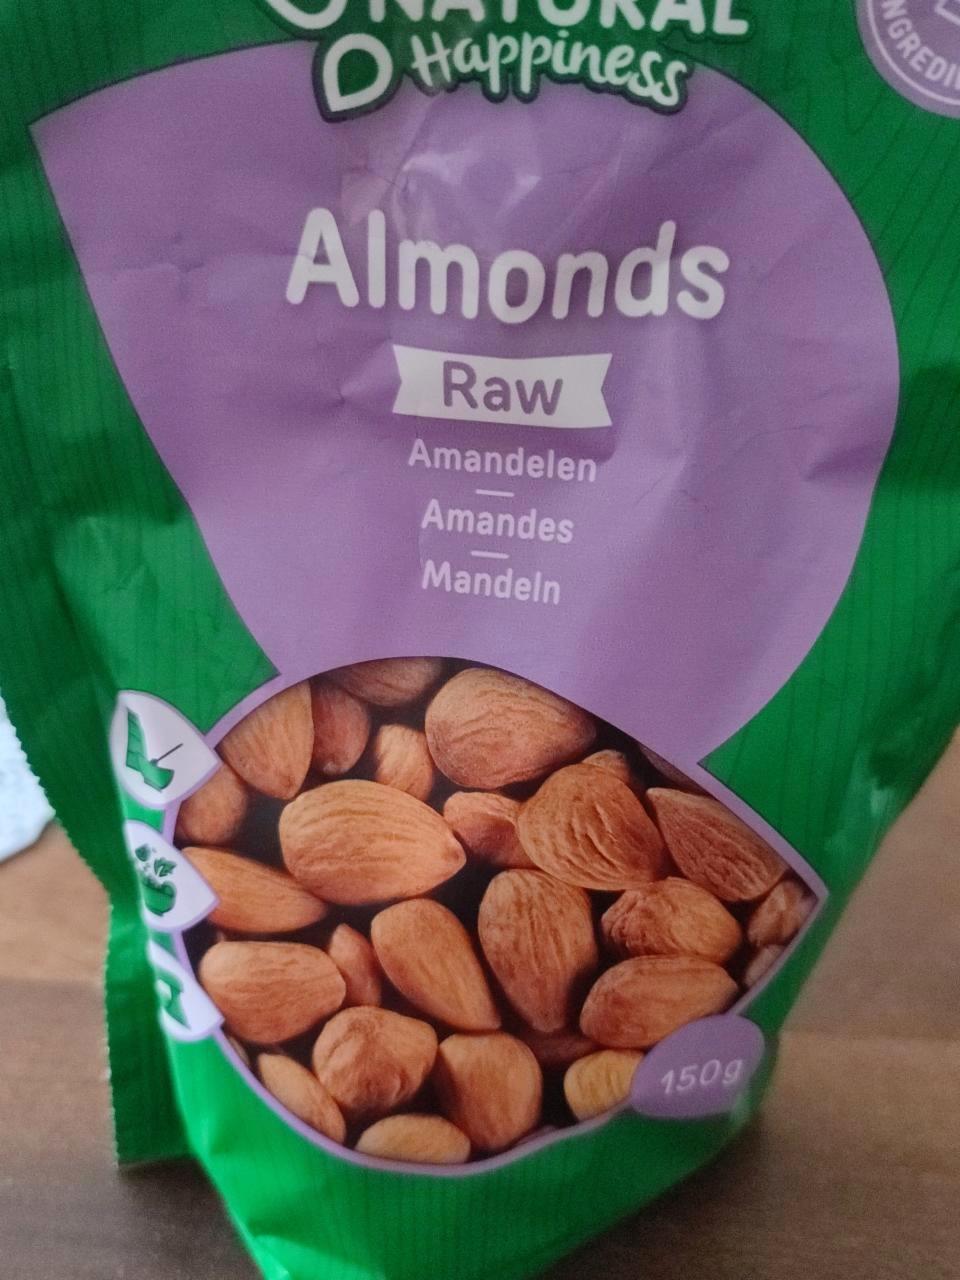 Fotografie - Almonds Raw Natural Happiness